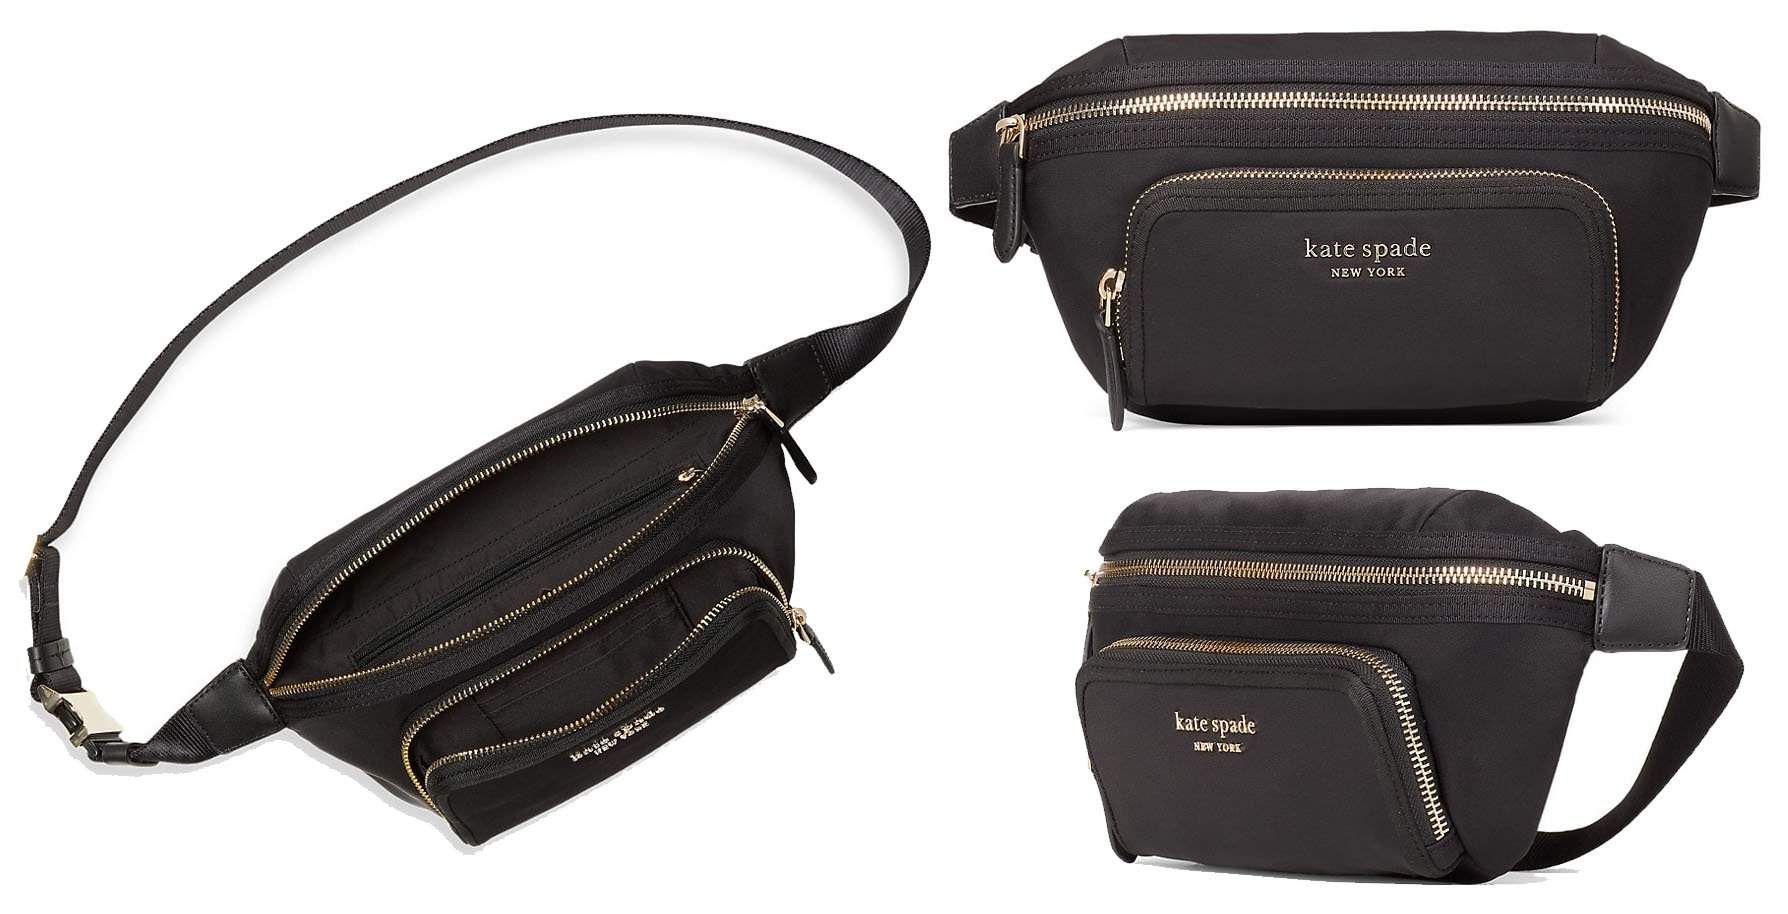 Made of durable nylon, this belt bag is highlighted with Kate Spade New York signature logo at the front zip pocket